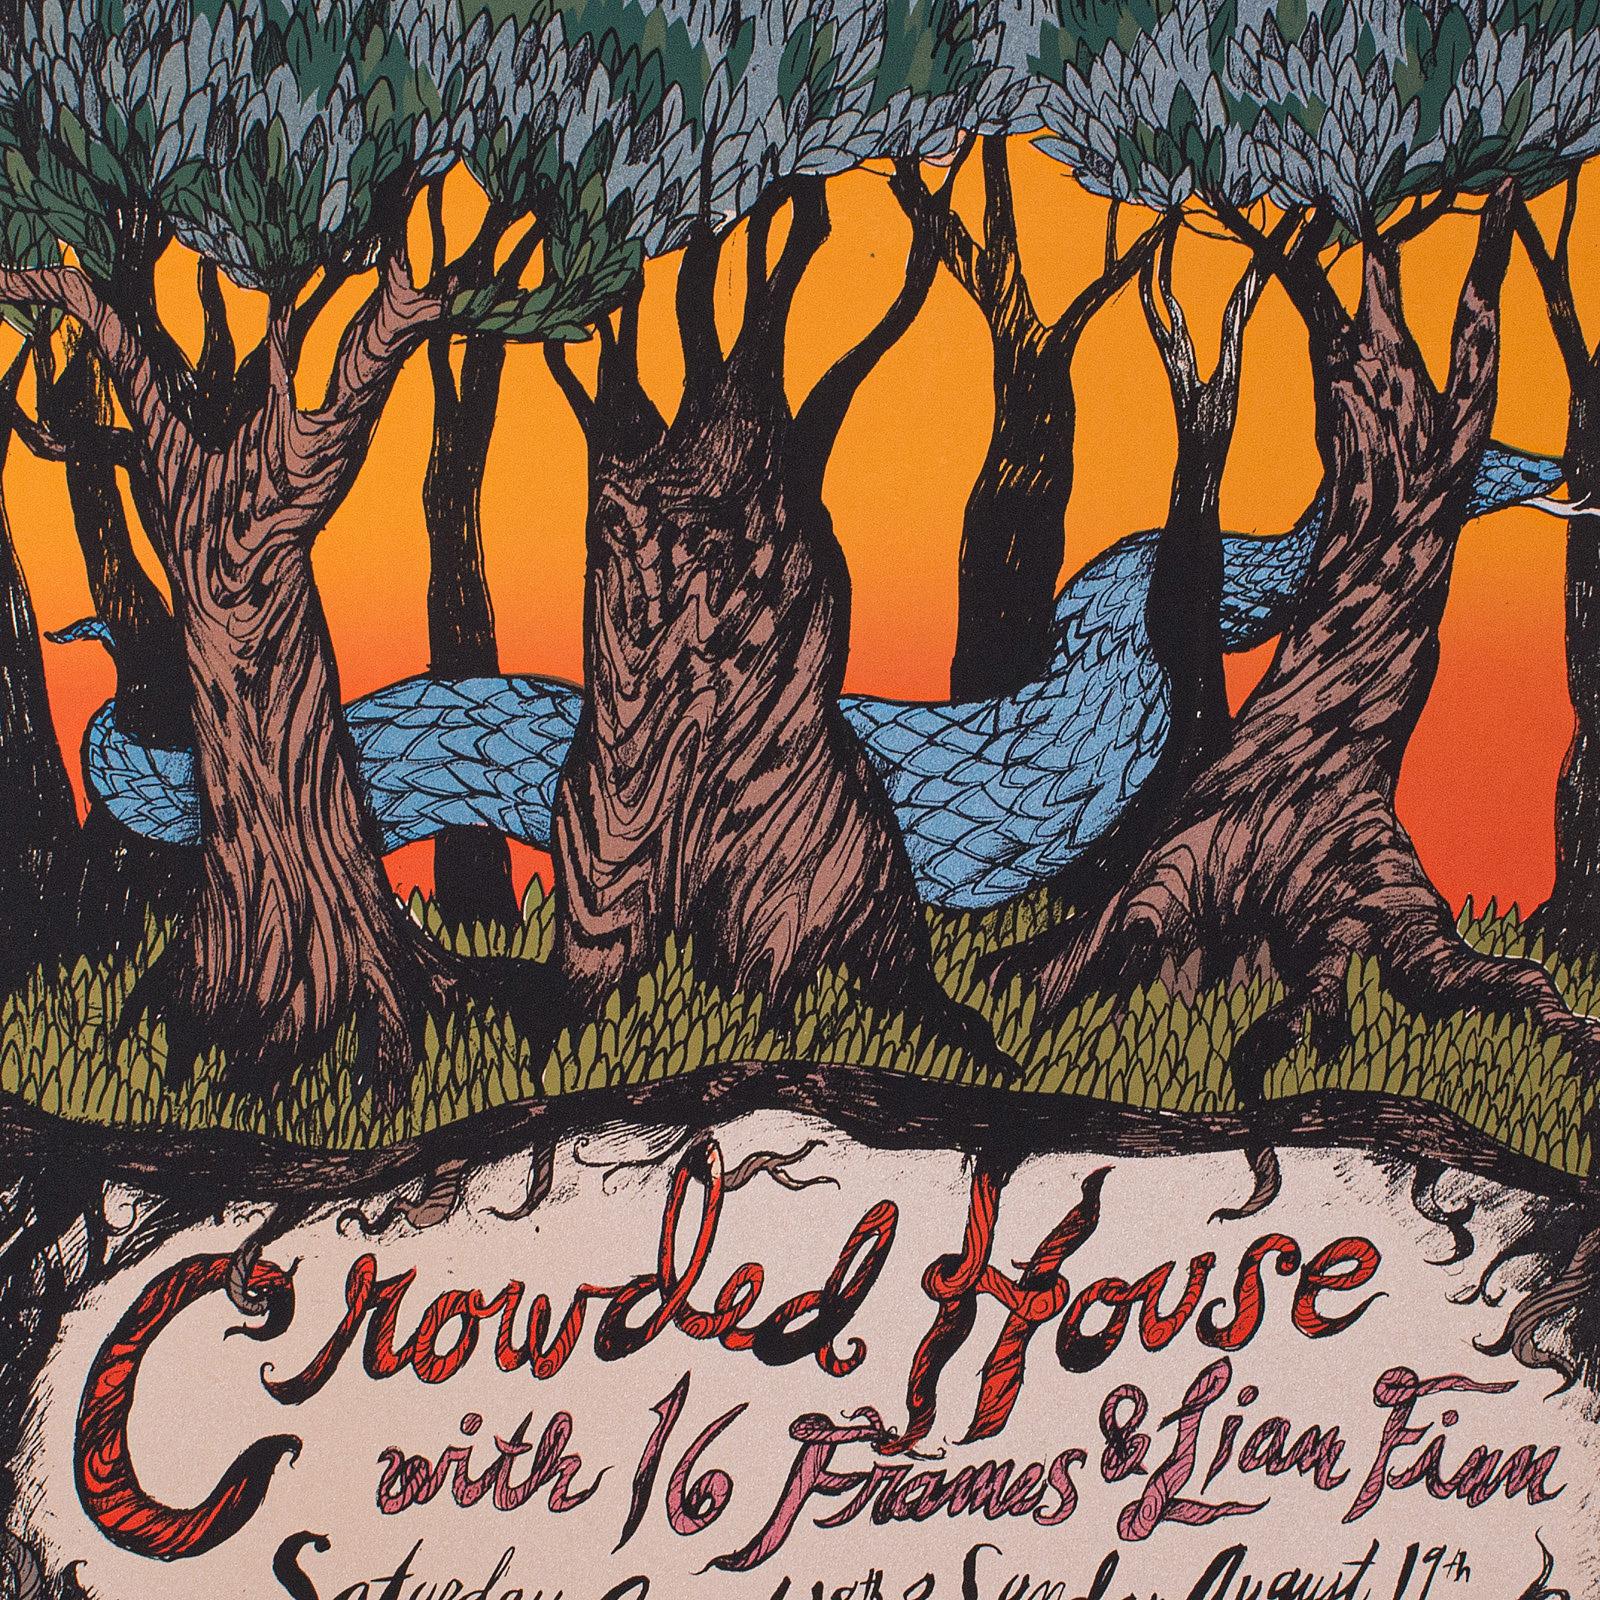 crowded house poster